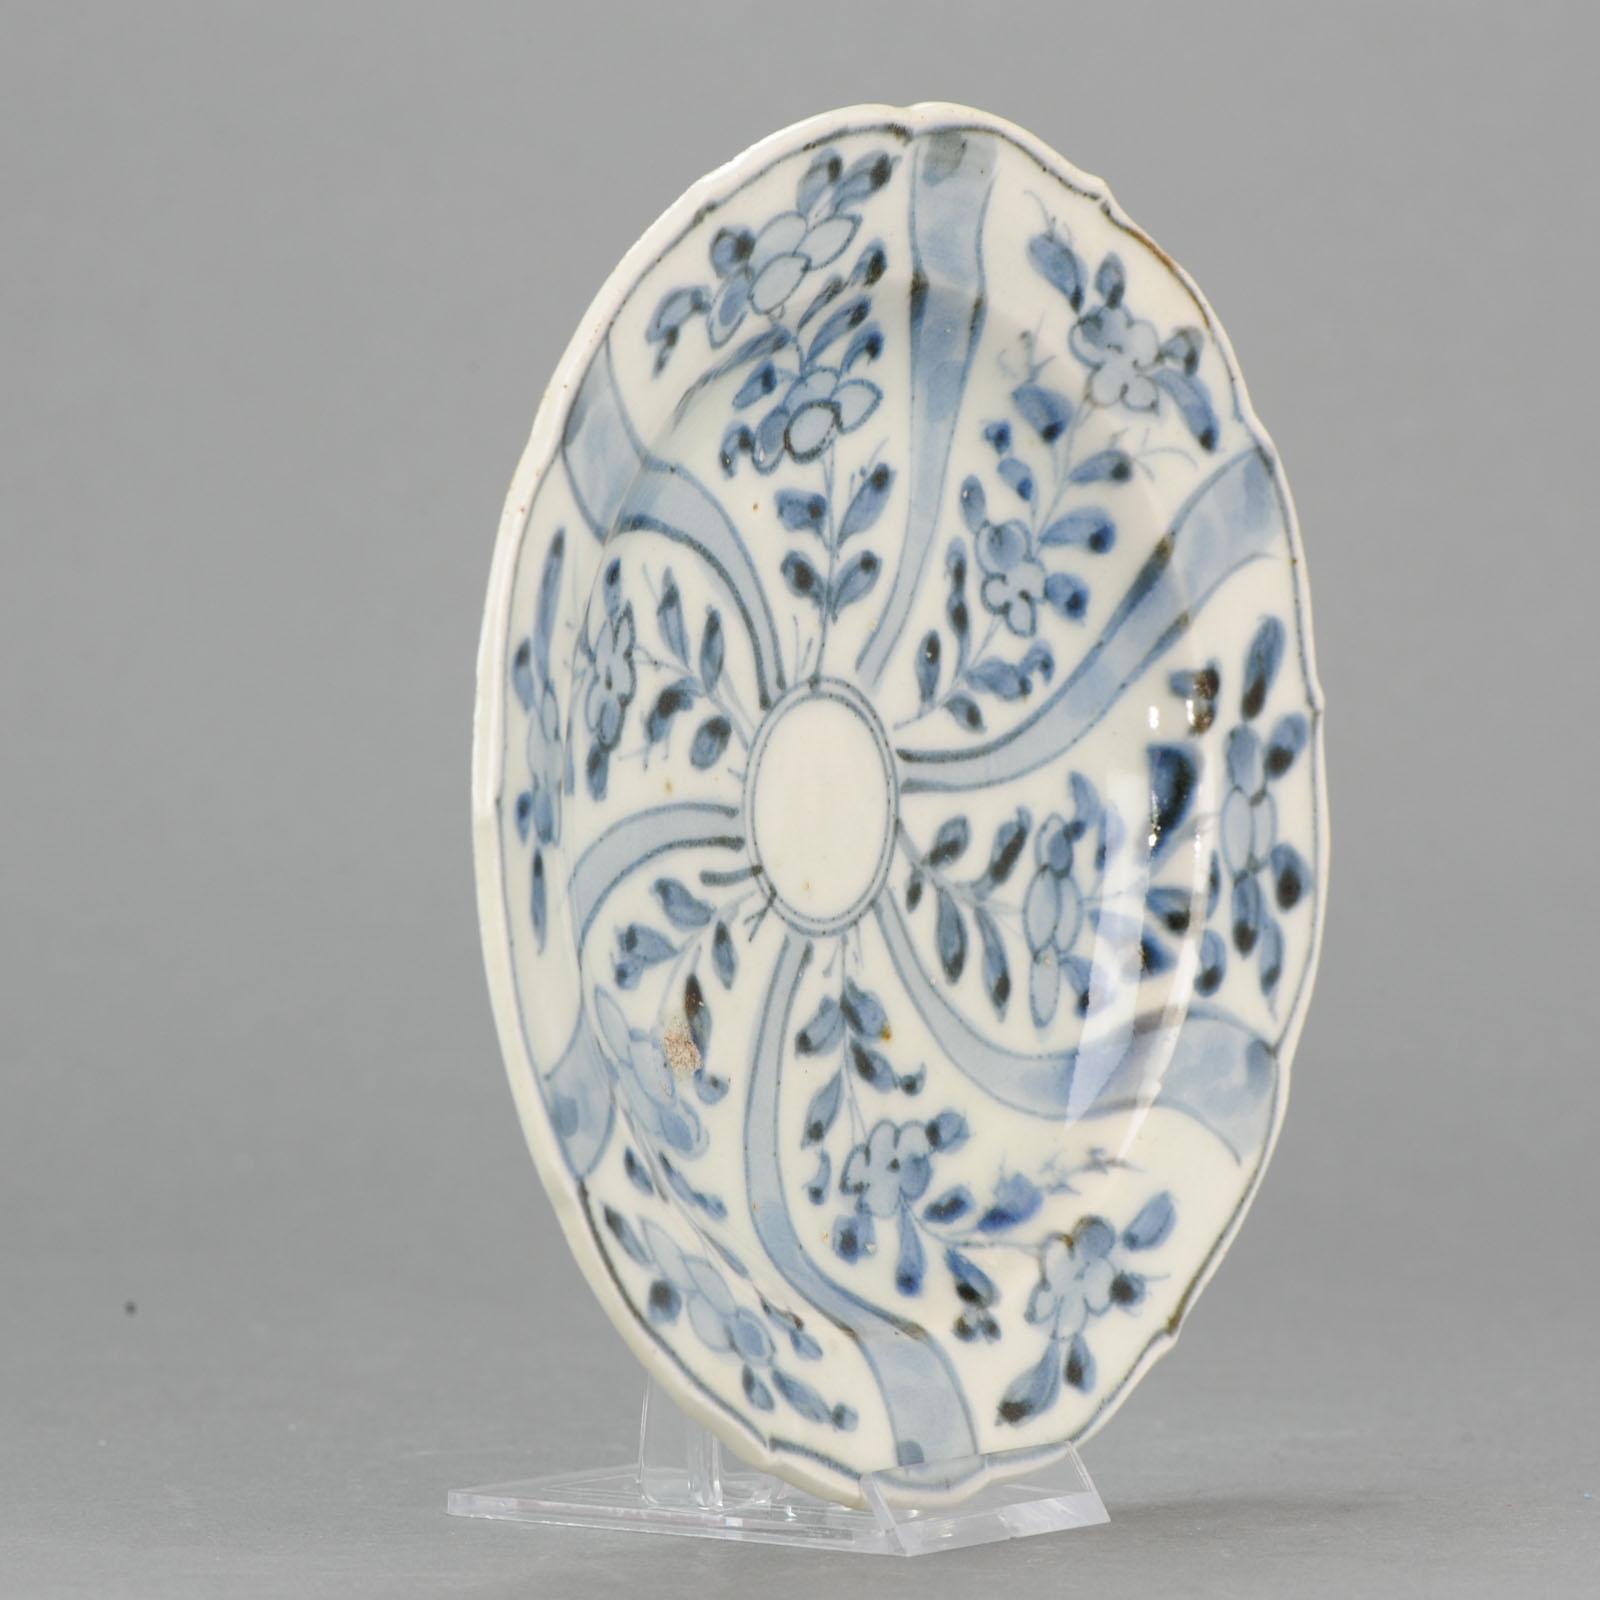 Antique Chinese Porcelain Ming Tianqi Transitional China Plate Flowers, 17th Century

A very nicely decorated plate.

Additional information:
Material: Porcelain & Pottery
Type: Plates
Color: Blue & White
Maker: Chongzhen (1627-1644)
Region of